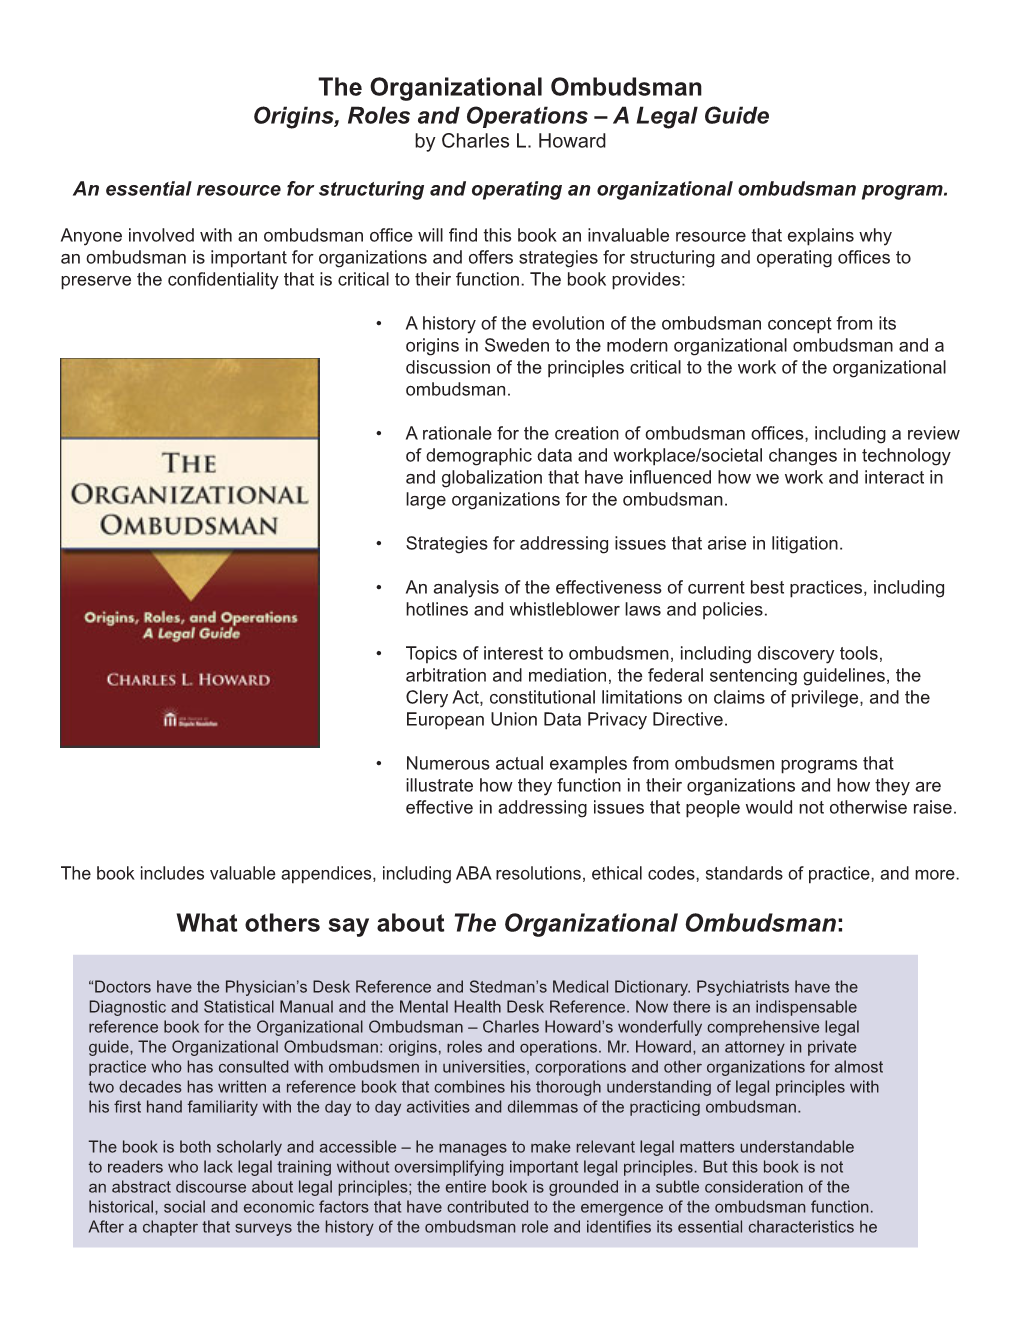 The Organizational Ombudsman by Charles L. Howard